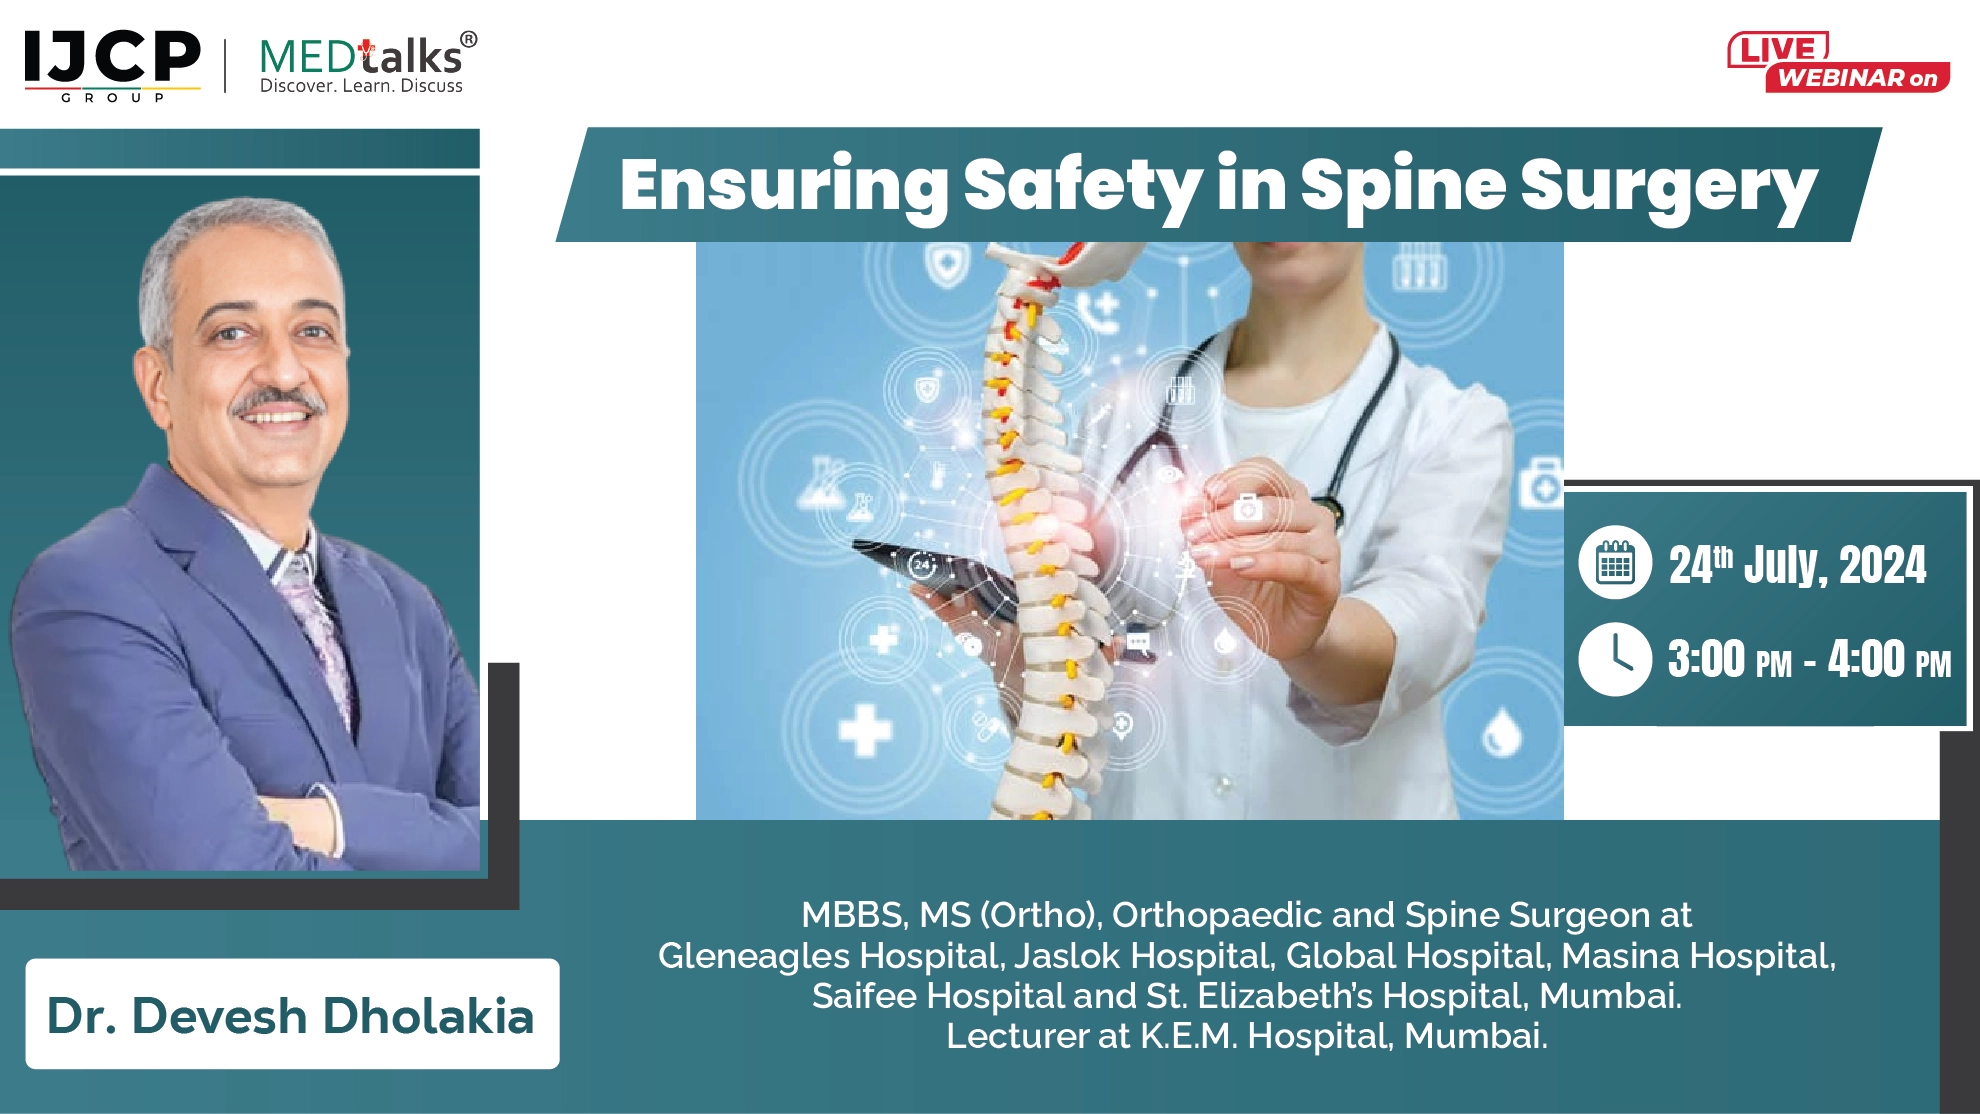 Ensuring Safety in Spine Surgery